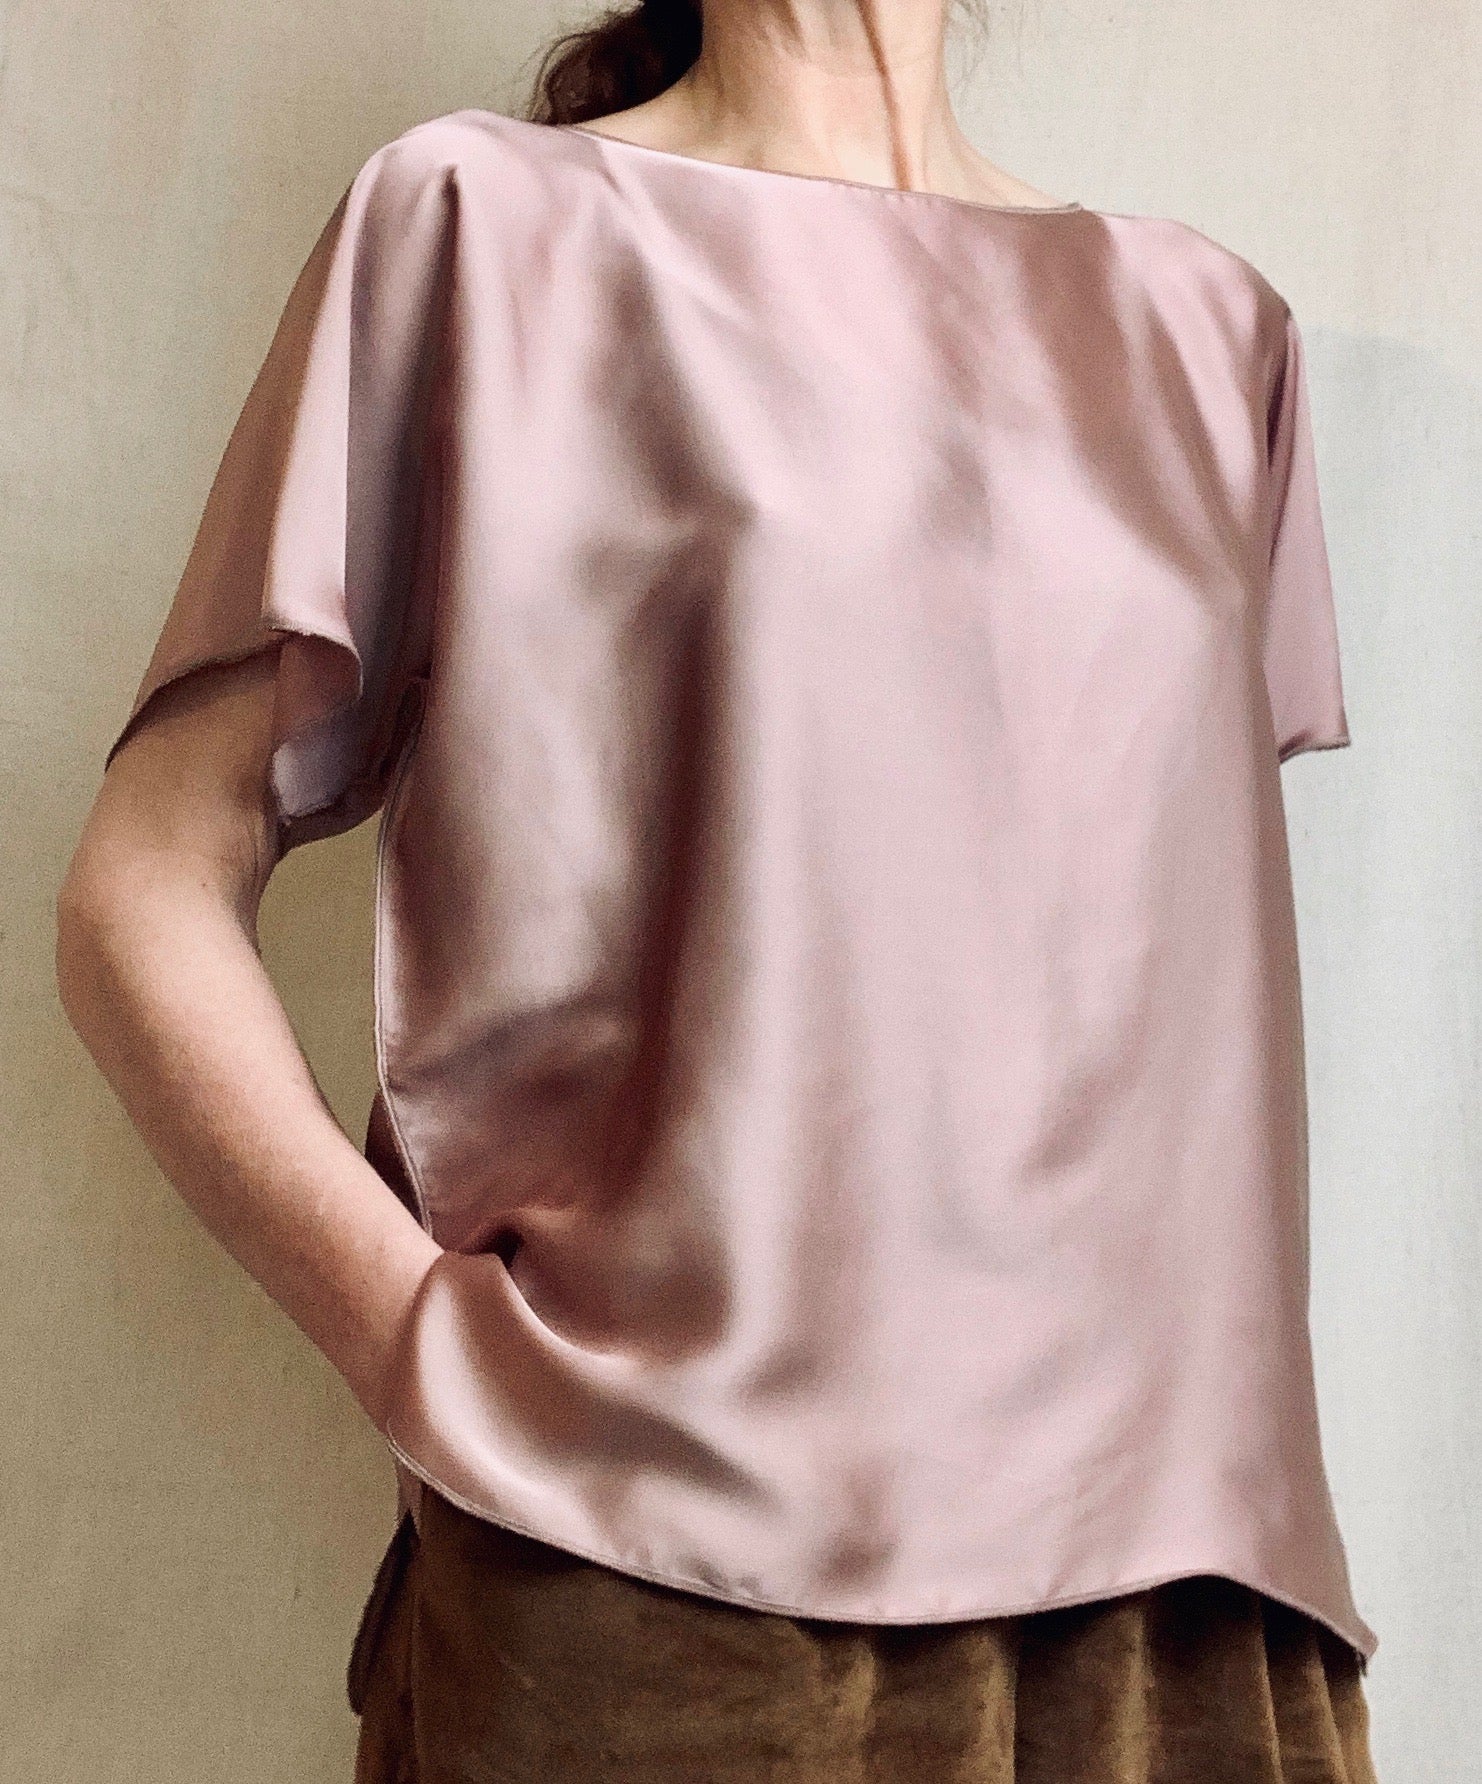 Anderst Jesse Top in Blush